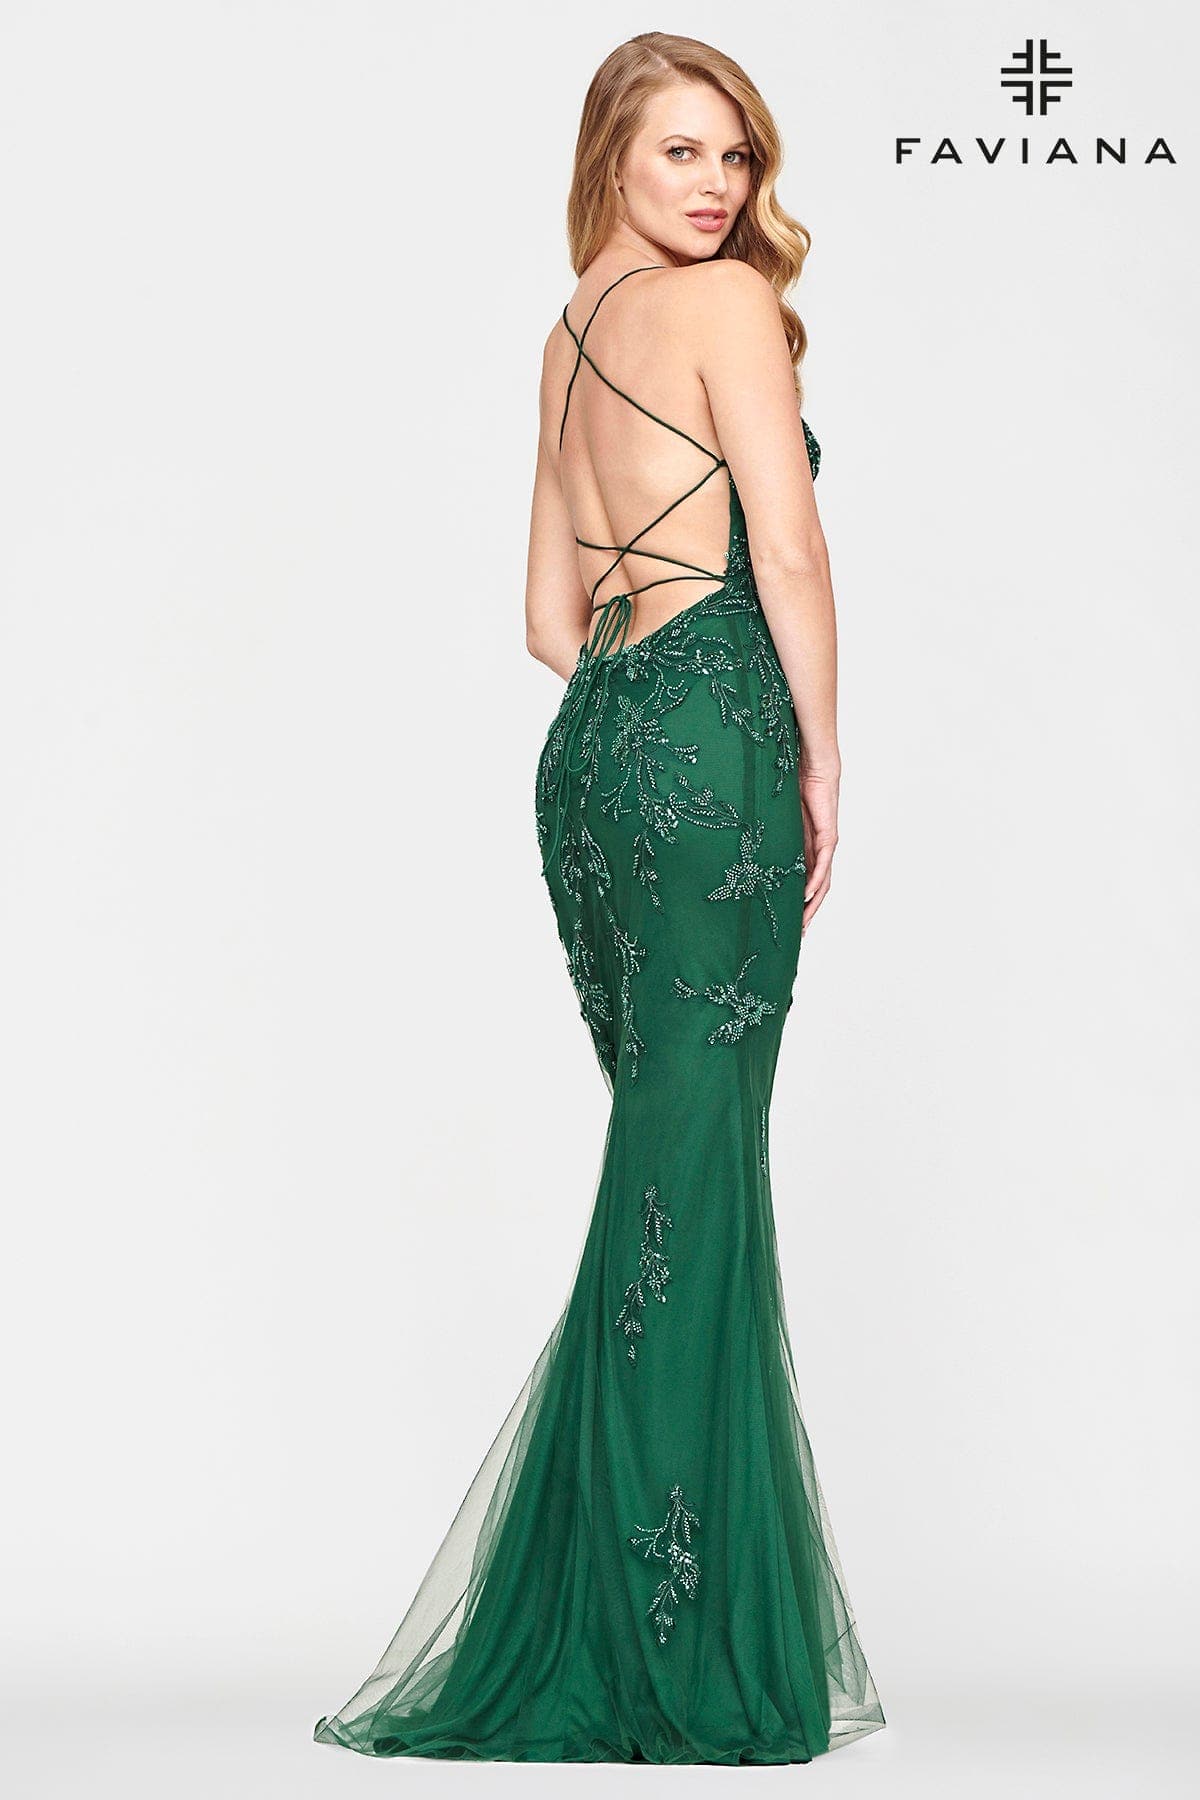 Hunter Green Long Tulle Prom Dress With Beaded Applique And Scoop Neckline